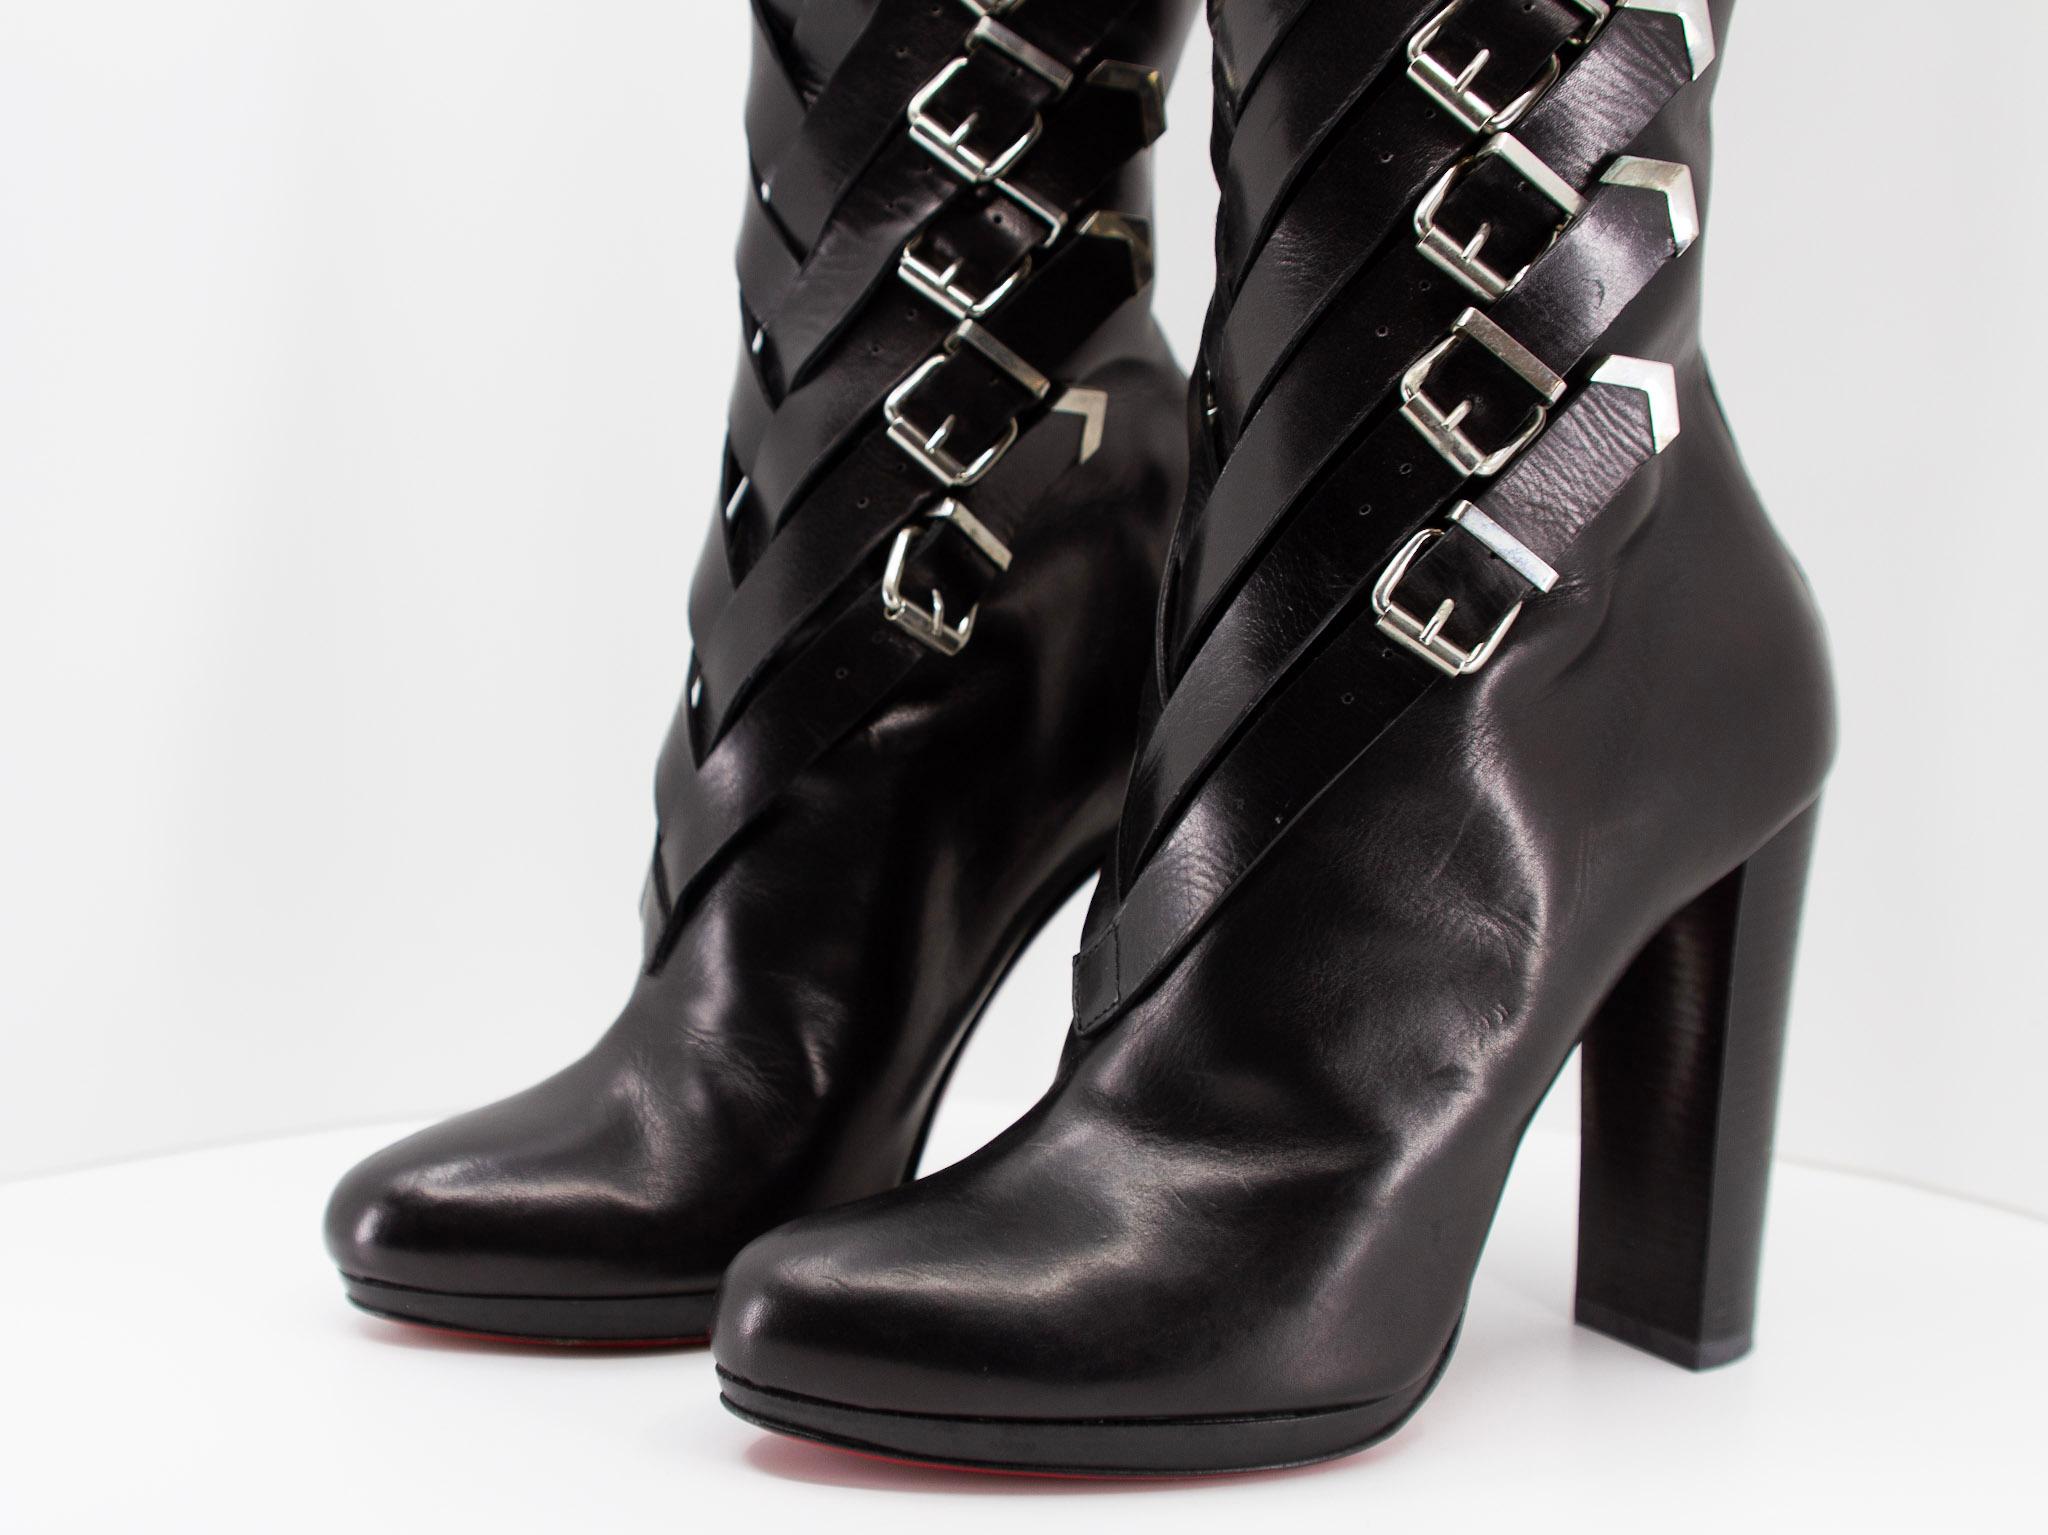 CHRISTIAN LOUBOUTIN Black Leather Knee High Buckle Platform Boots

100% Authentic

37 IT
 black and silver

leather and metal Leather lining Padded Insole

Almond toe Self-covered heel 4 1/4